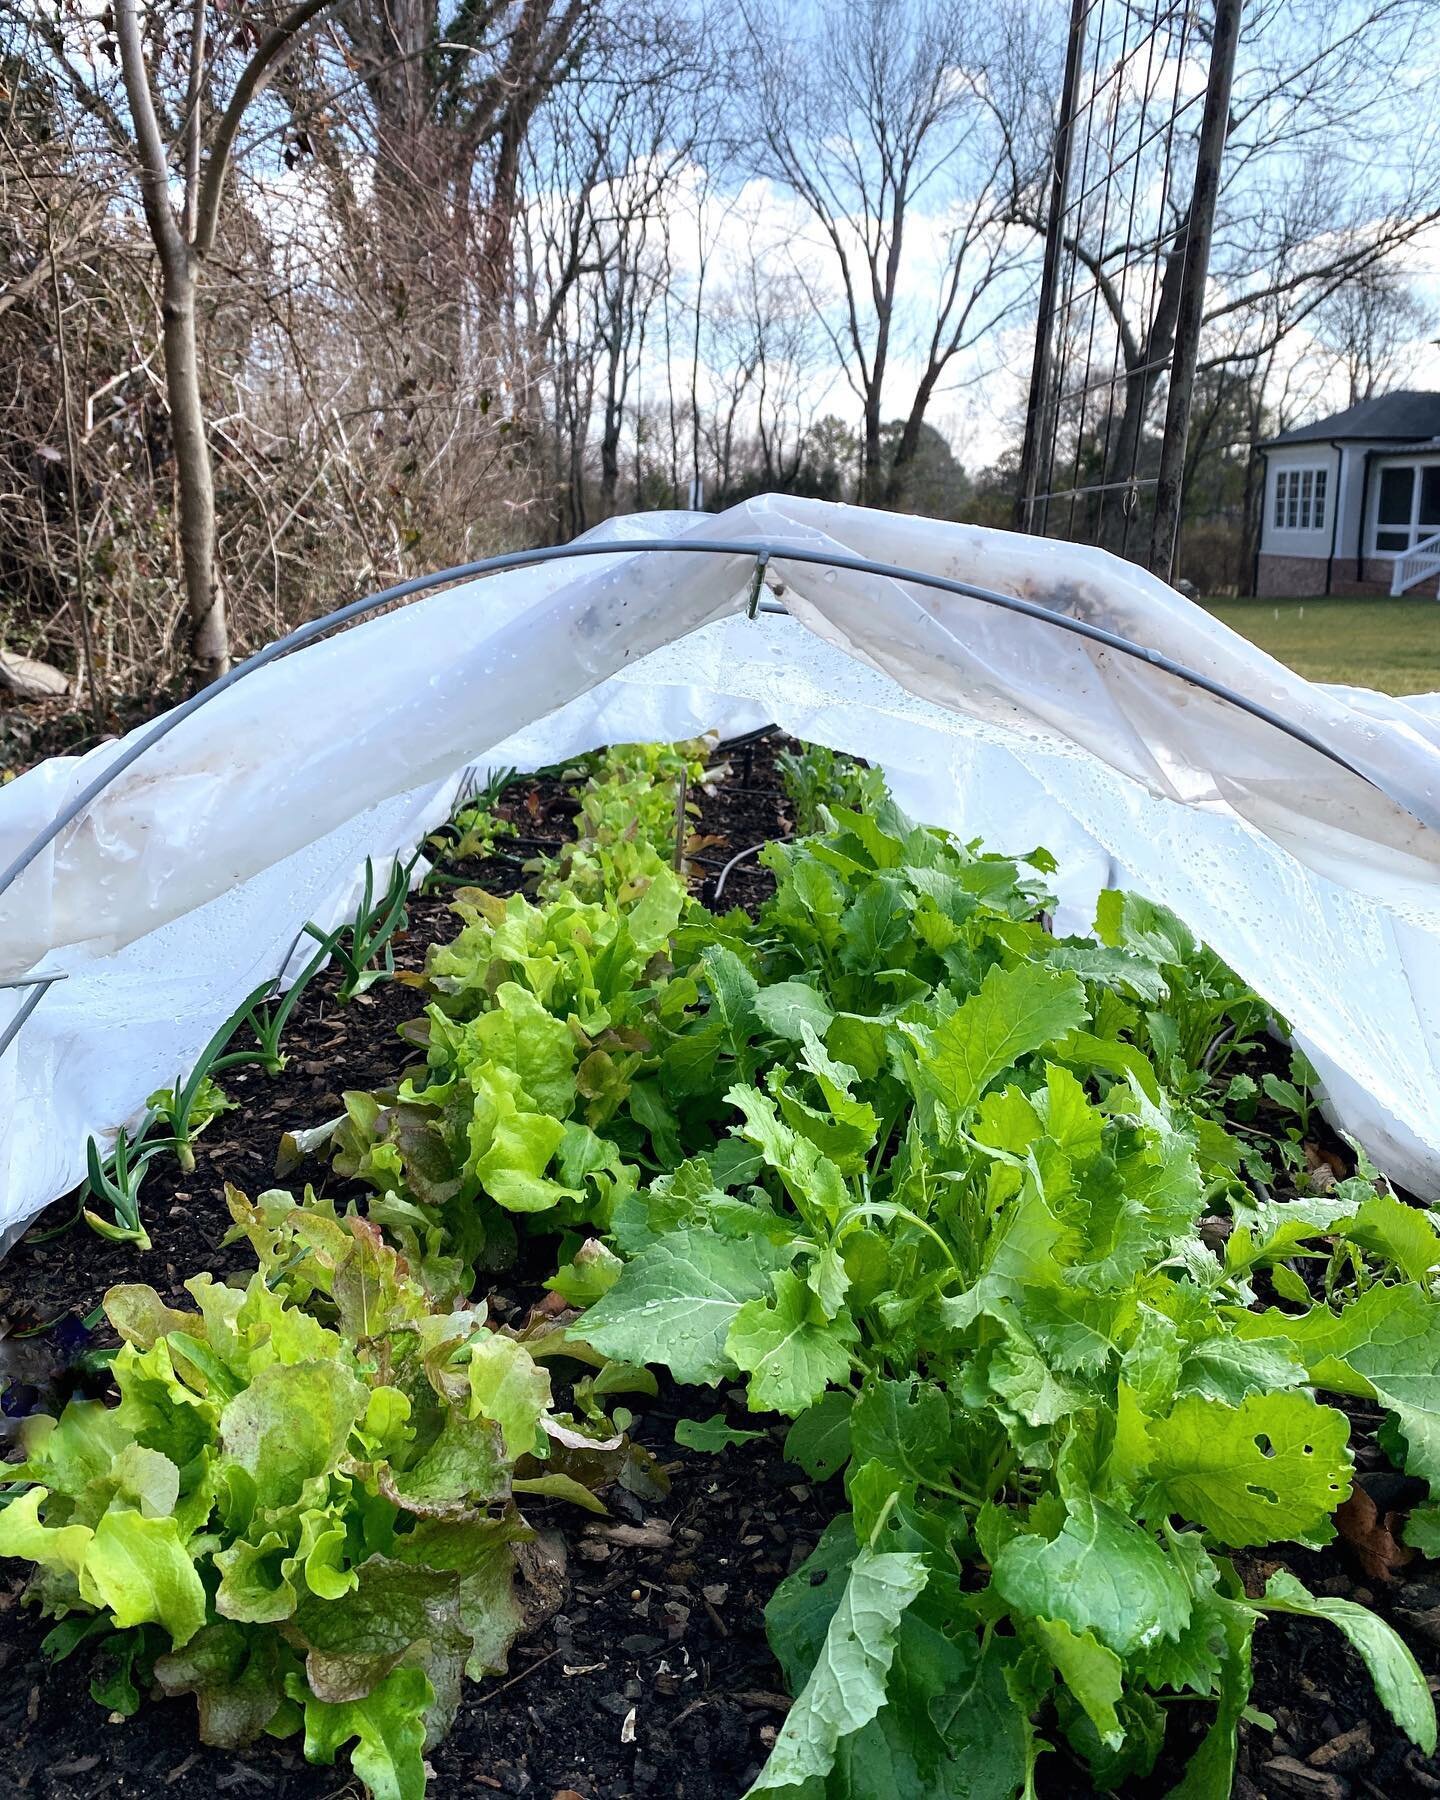 A little peek under the super hoops today revealed vibrant January lettuce, broccoli rabe and garlic for @jculler + @lovelocal - these hoops from @gardeners make winter growing easy and keep these little greens warm and happy. 🥦🧄🥬🌿
.
.
.
#lettuce